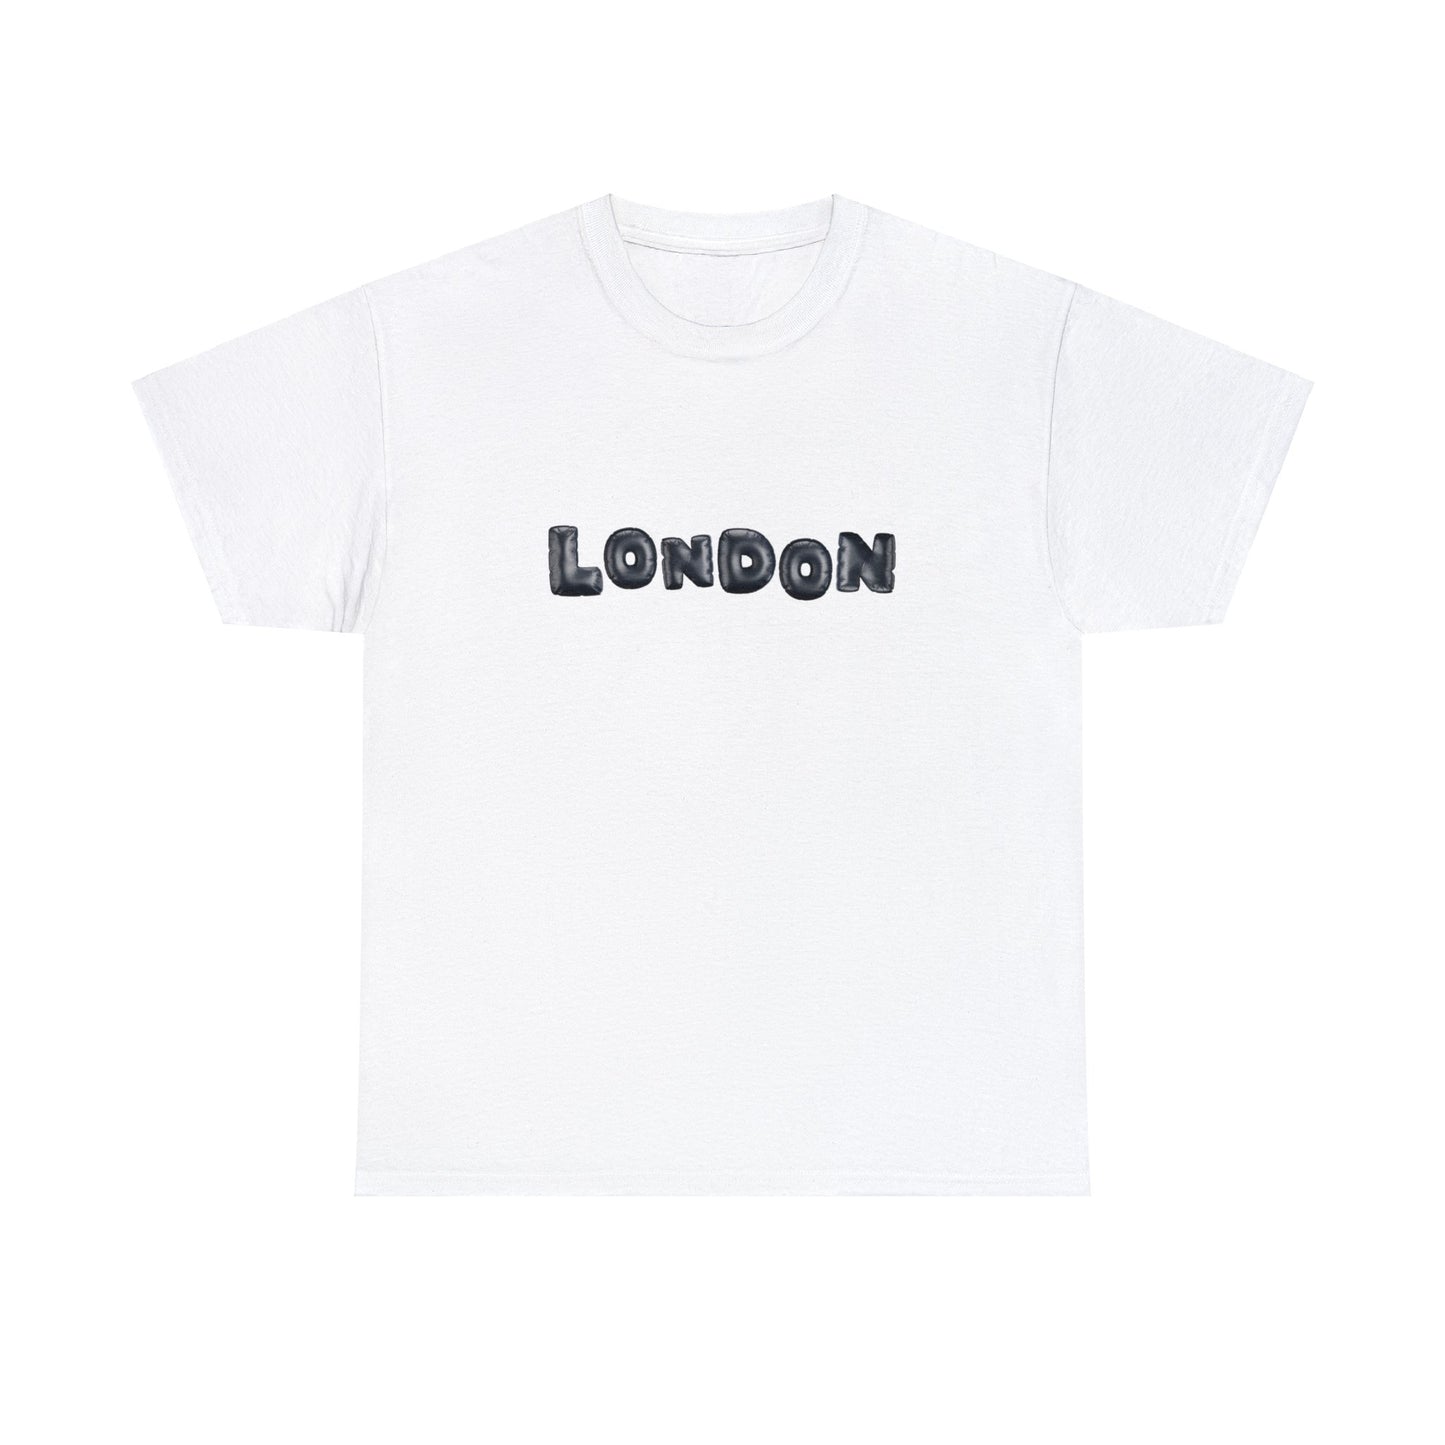 Text LONDON T-shirt Unisex Heavy Cotton Tee Simple Text London Logo for Fans of London, United Kingdom